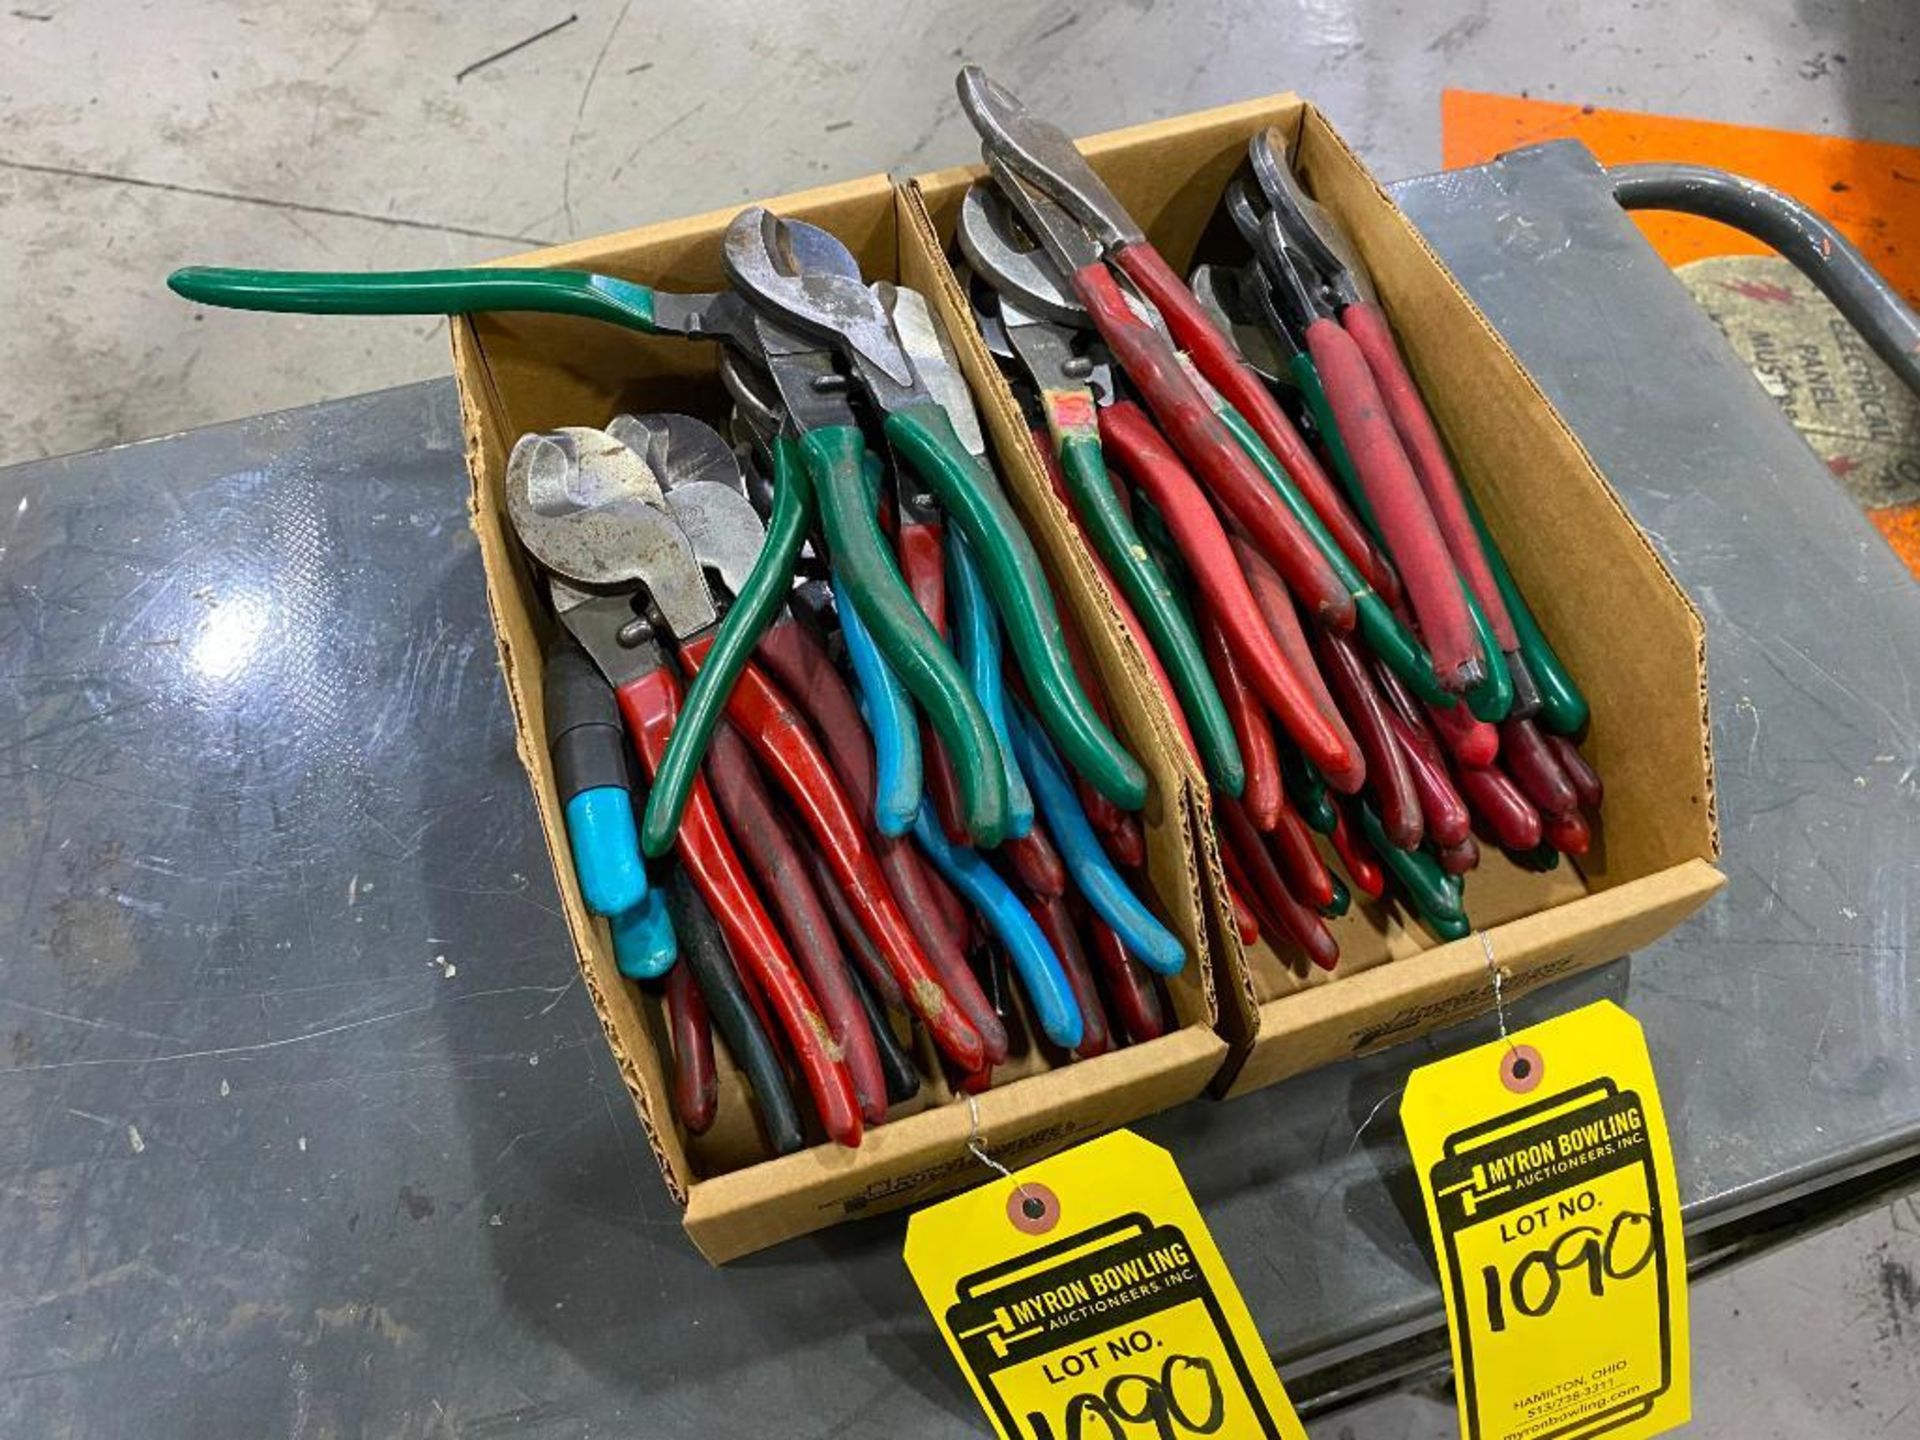 (2) BOXES OF CABLE CUTTERS